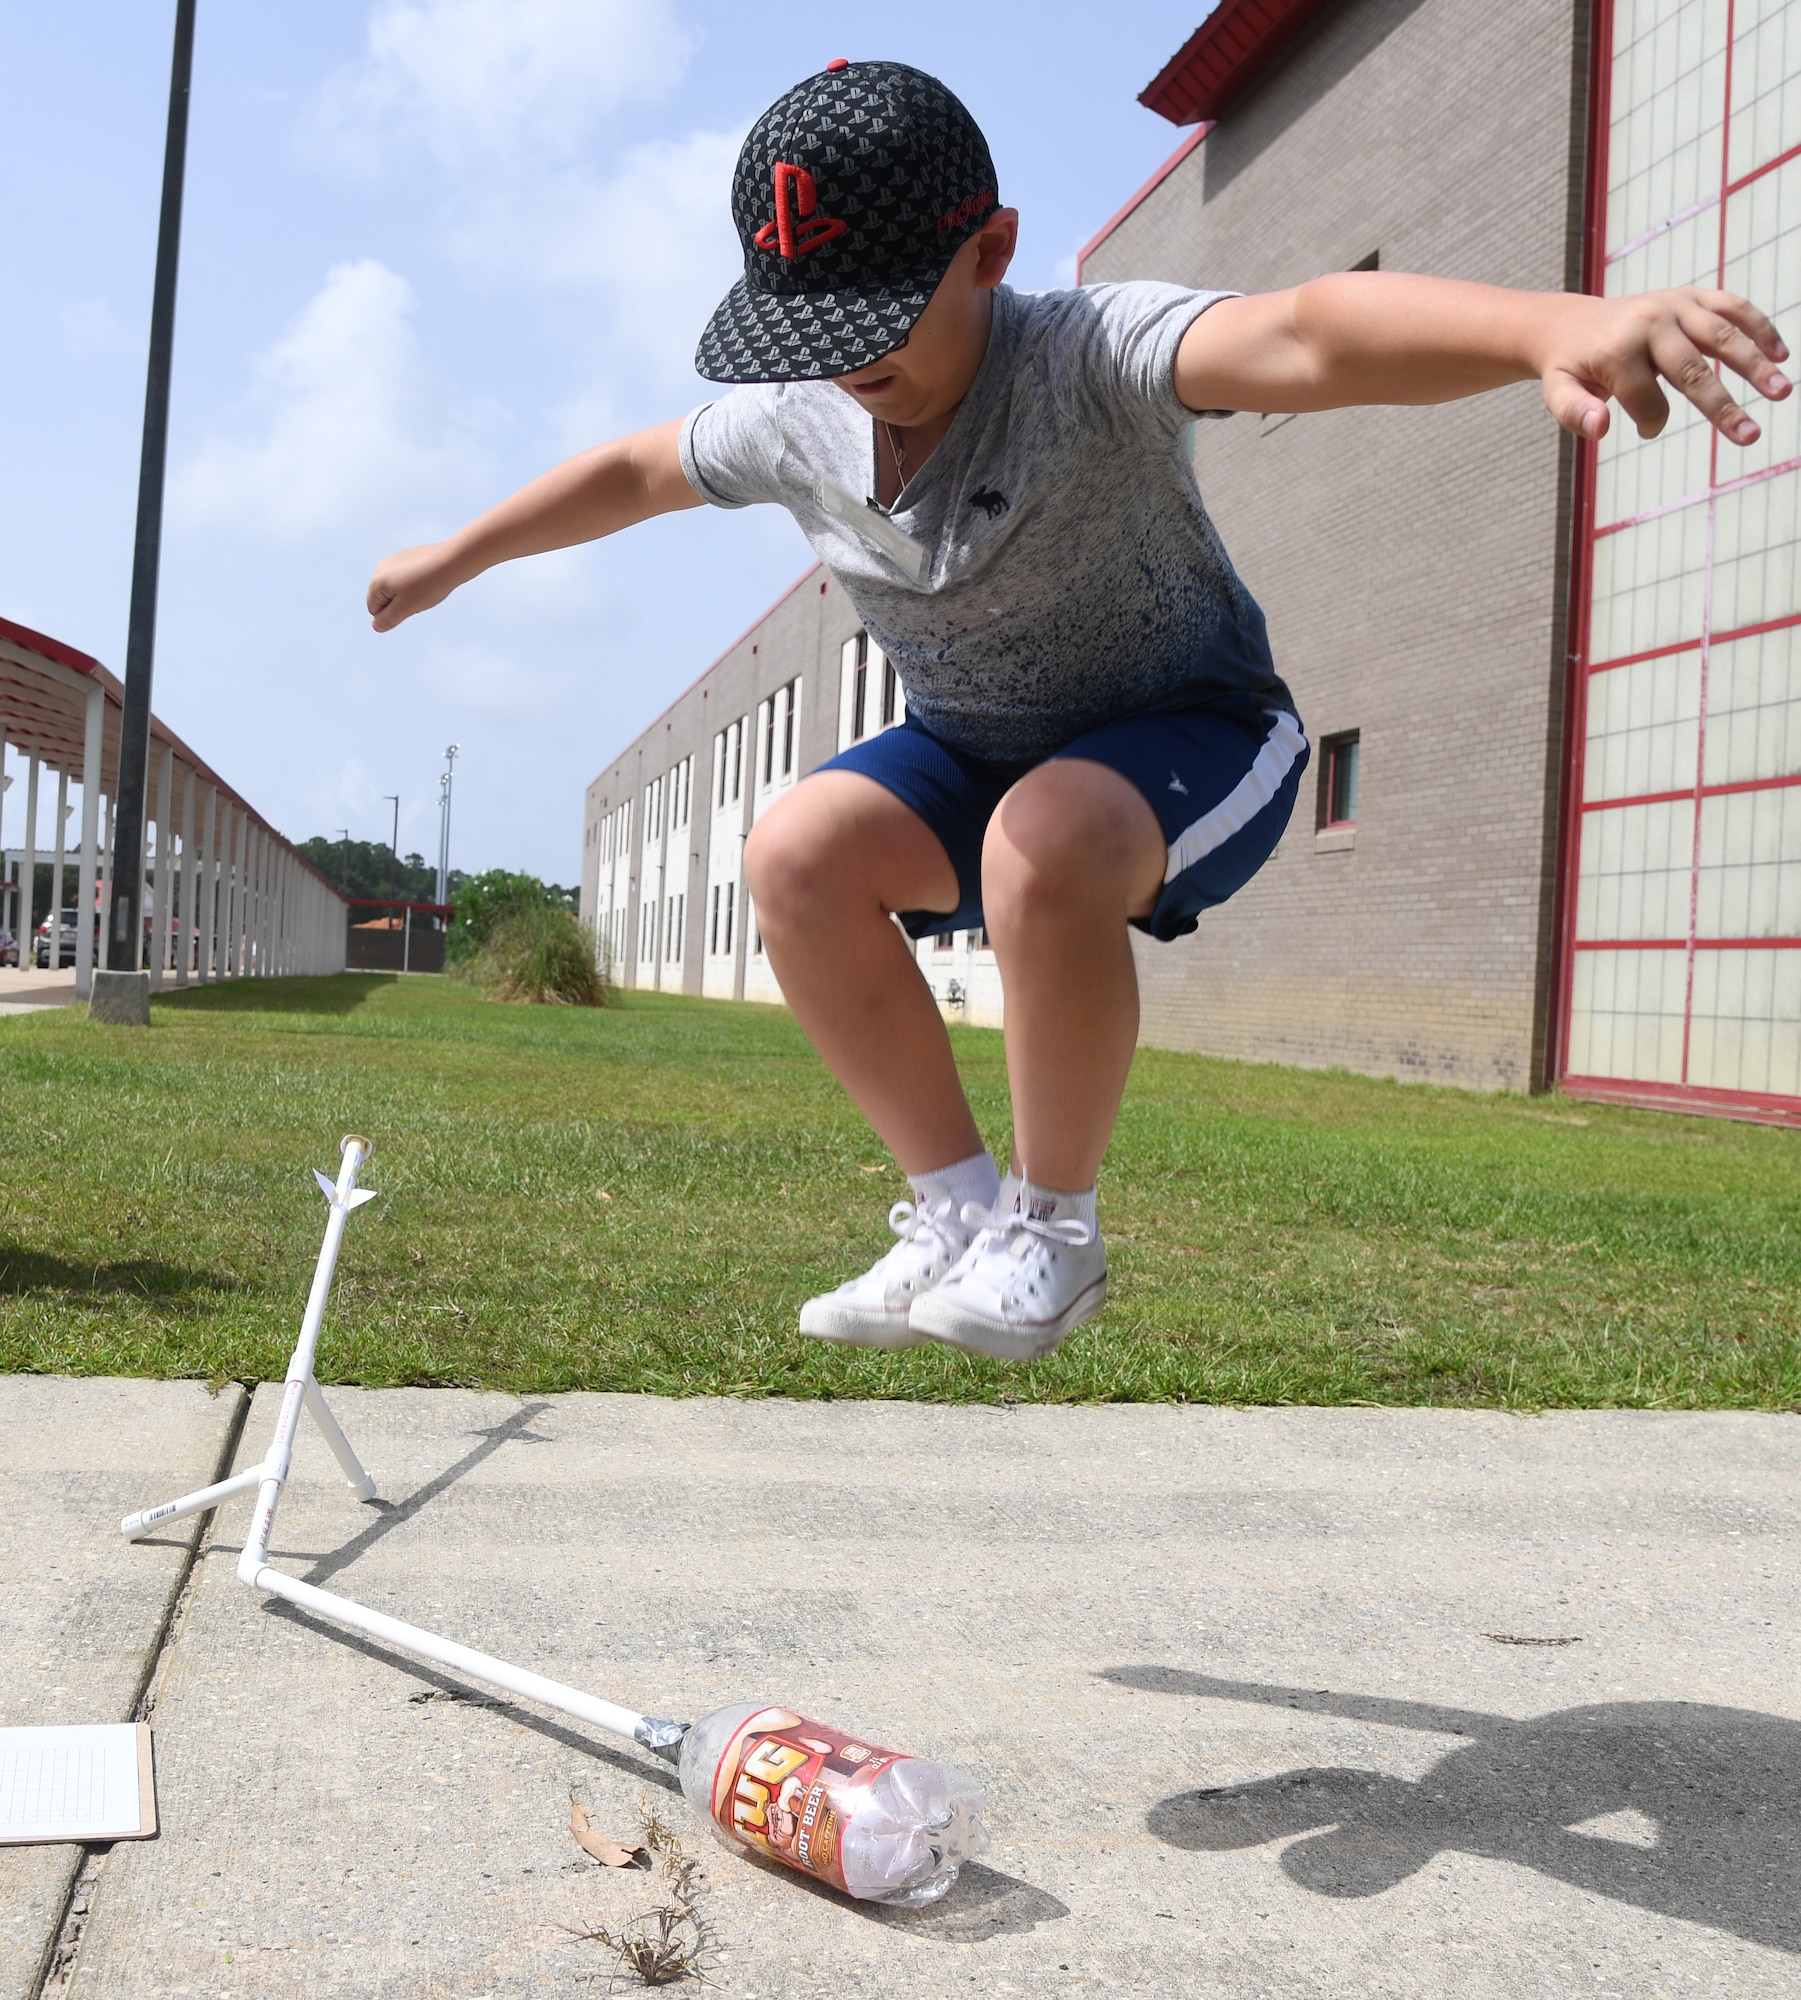 Michael Howell, Biloxi Junior High School seventh grader, launches a jet propulsion laboratory stomp rocket during the Biloxi Public Schools Science, Technology, Engineering and Mathematics Summer Camp program at Biloxi High School in Biloxi, Mississippi, June 25, 2019. The four-day STEM summer program teaches first through seventh grade students skills for future careers and fosters valuable life skills like problem solving, creativity and collaboration. Keesler personnel volunteered their time to lead instructions on various projects. (U.S. Air Force photo by Kemberly Groue)